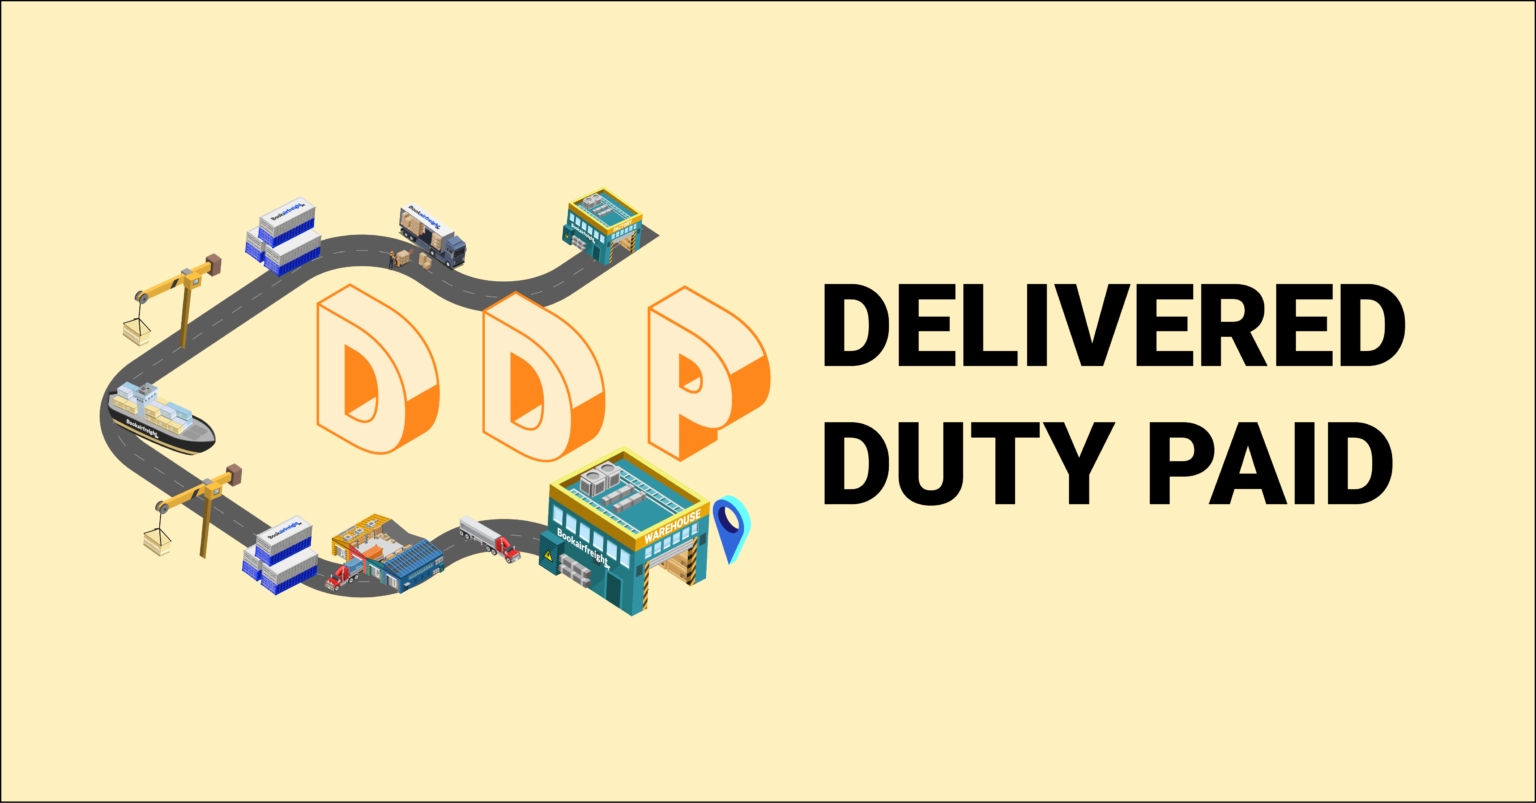 Cover Image for New feature! - Delivered duty paid (DDP)